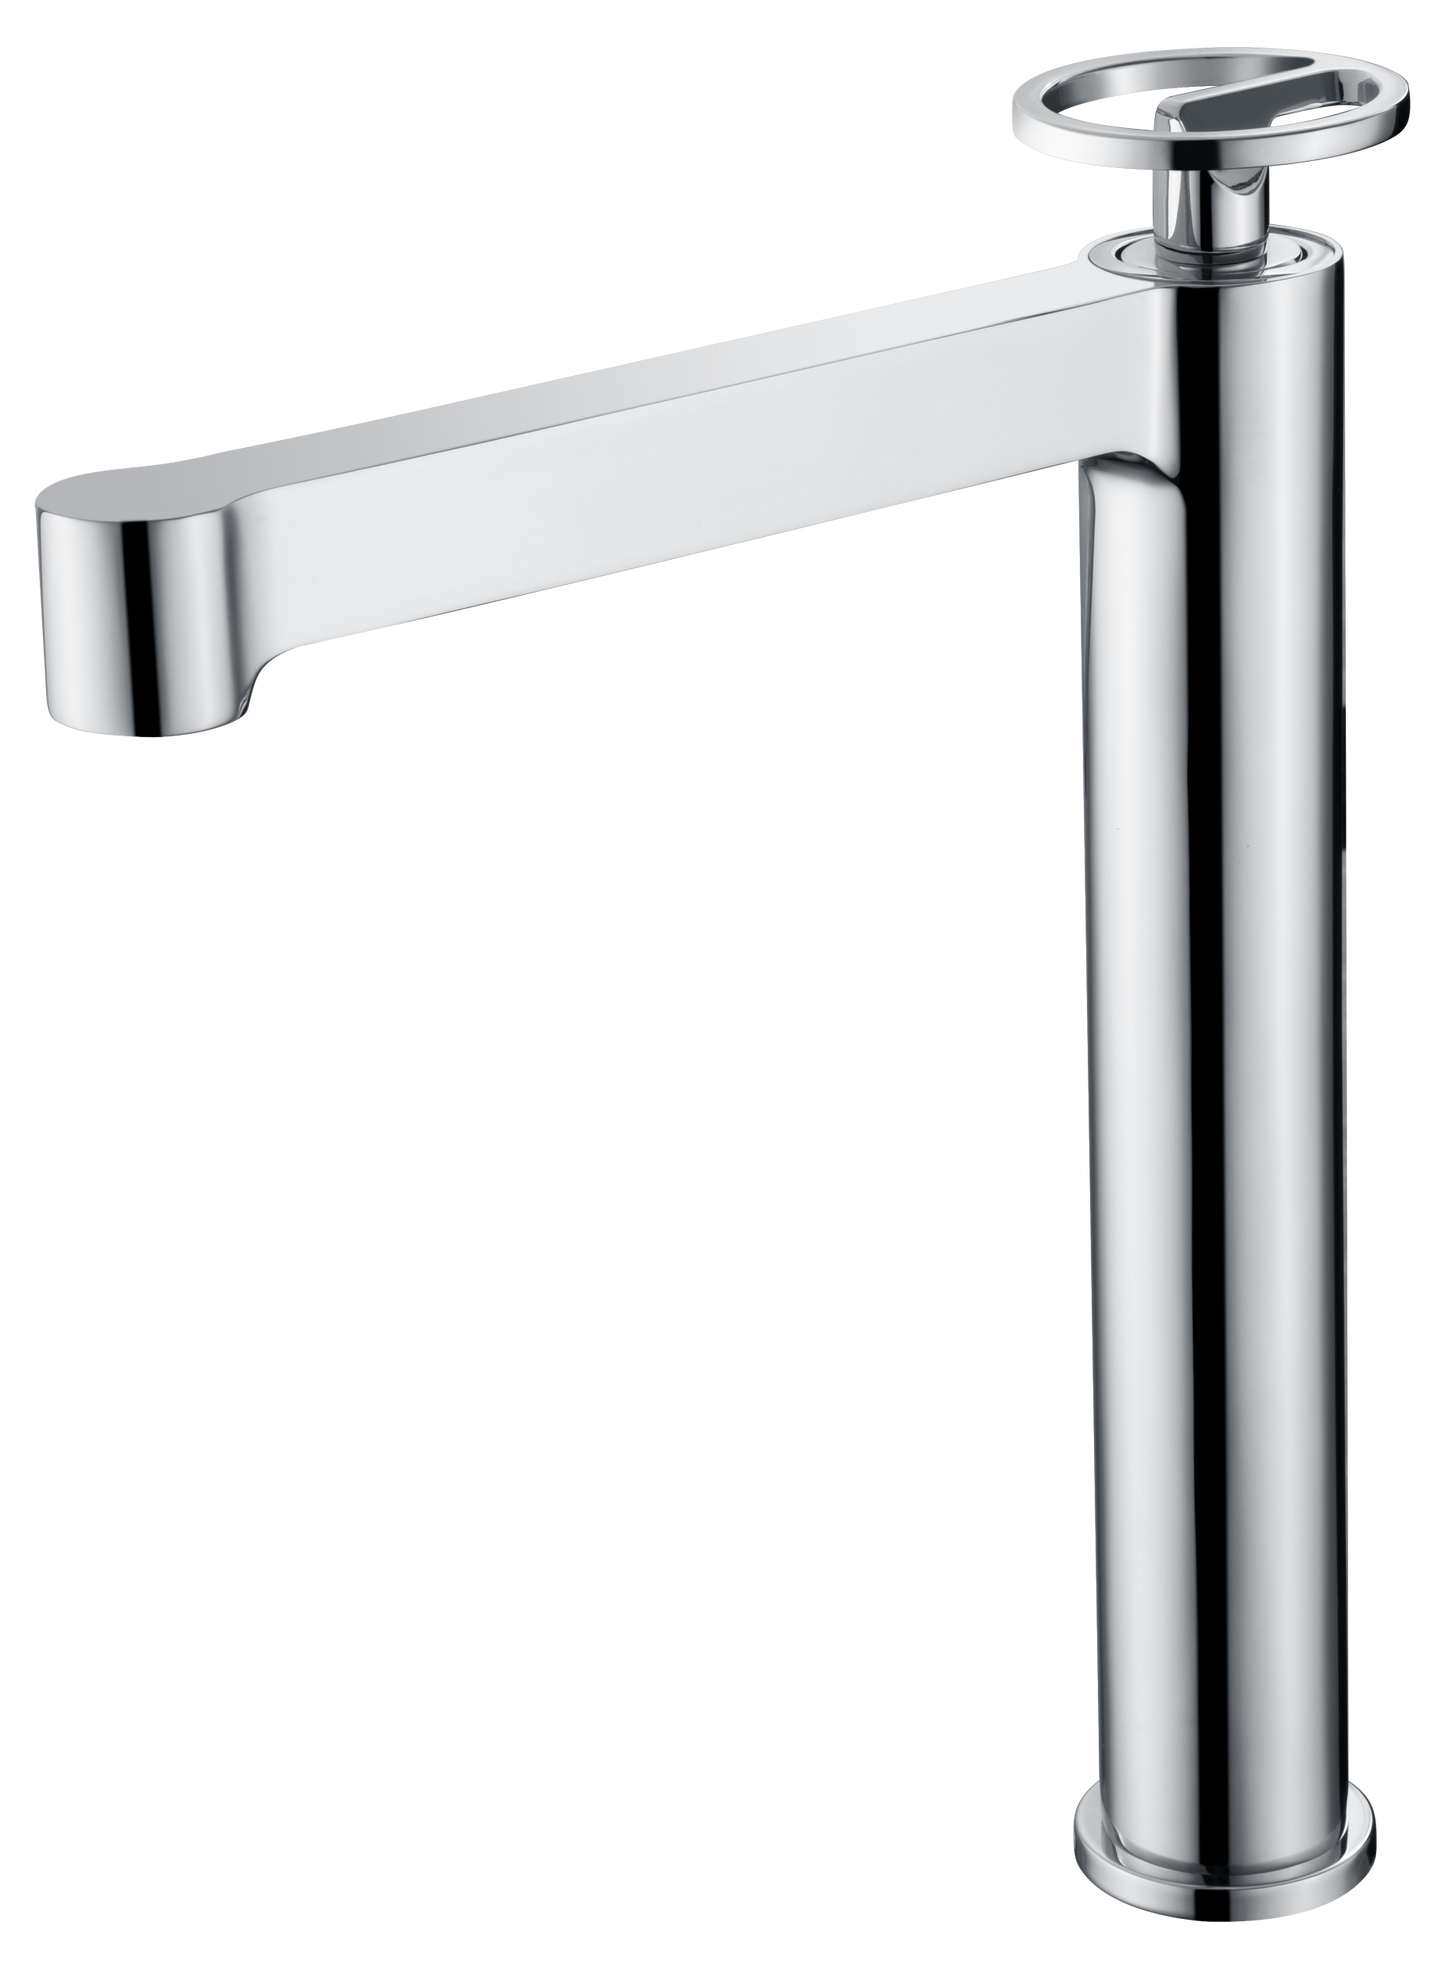 Olimpo chrome single-lever basin mixer tap by Imex 